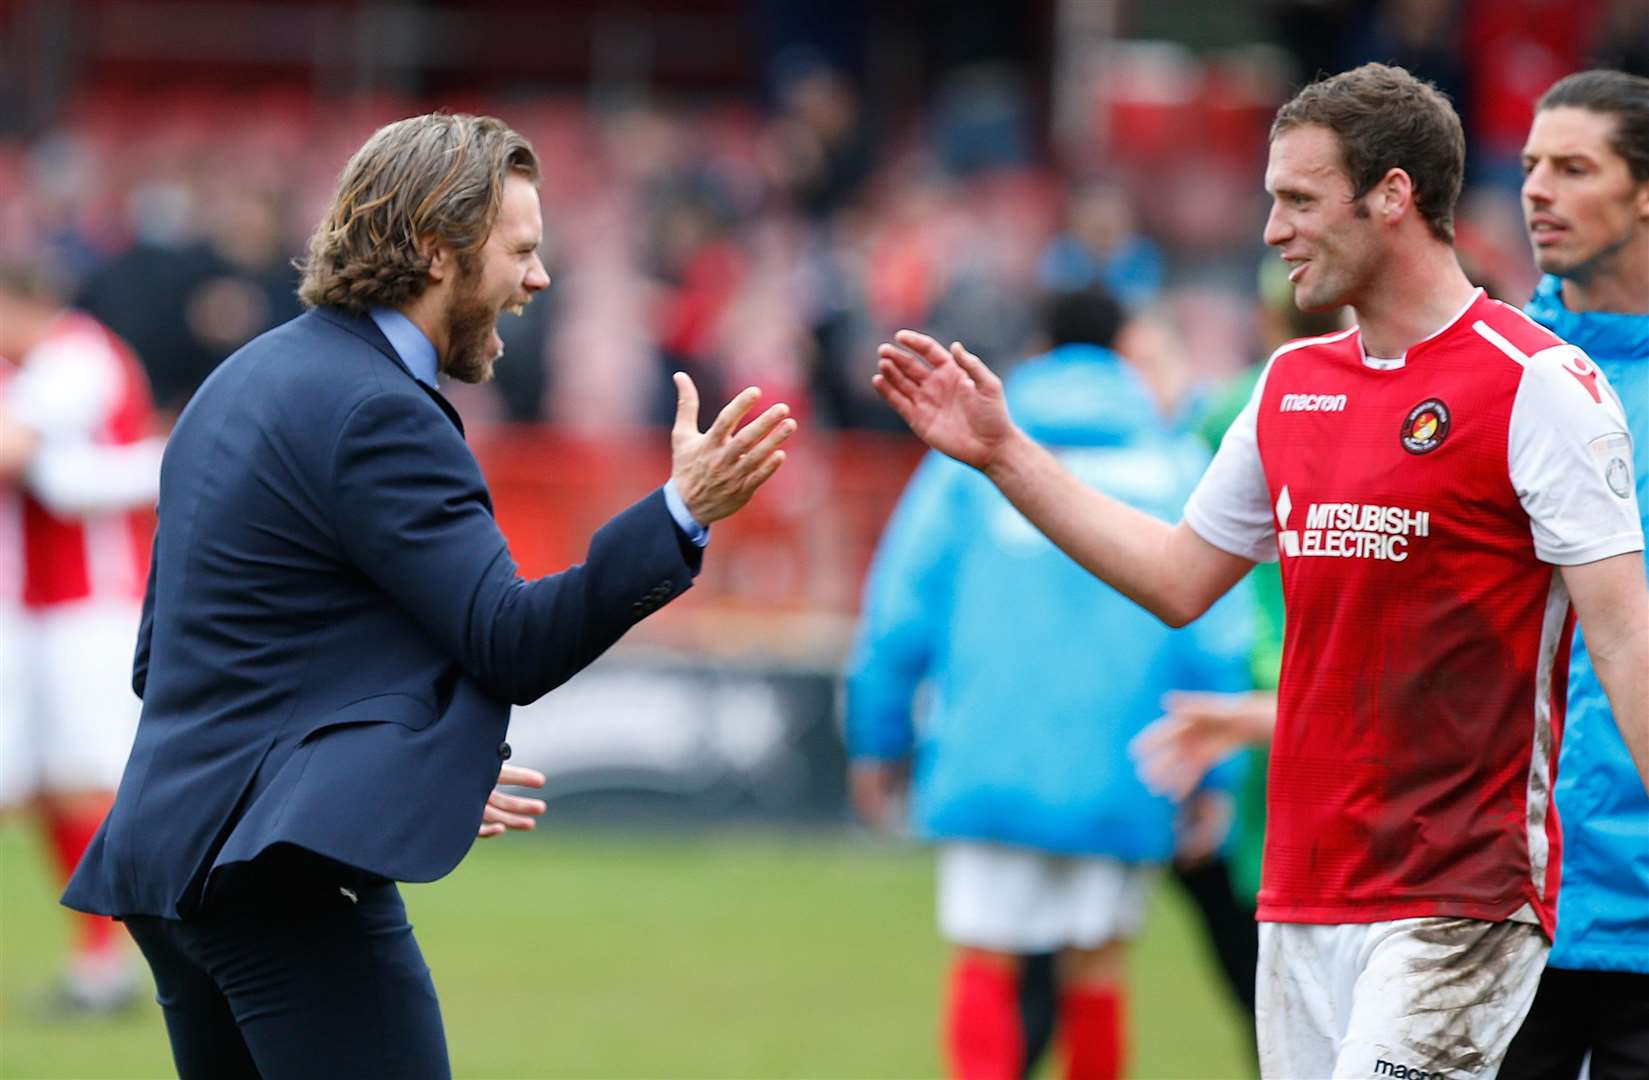 Daryl McMahon greets matchwinner Andy Drury Picture: Andy Jones